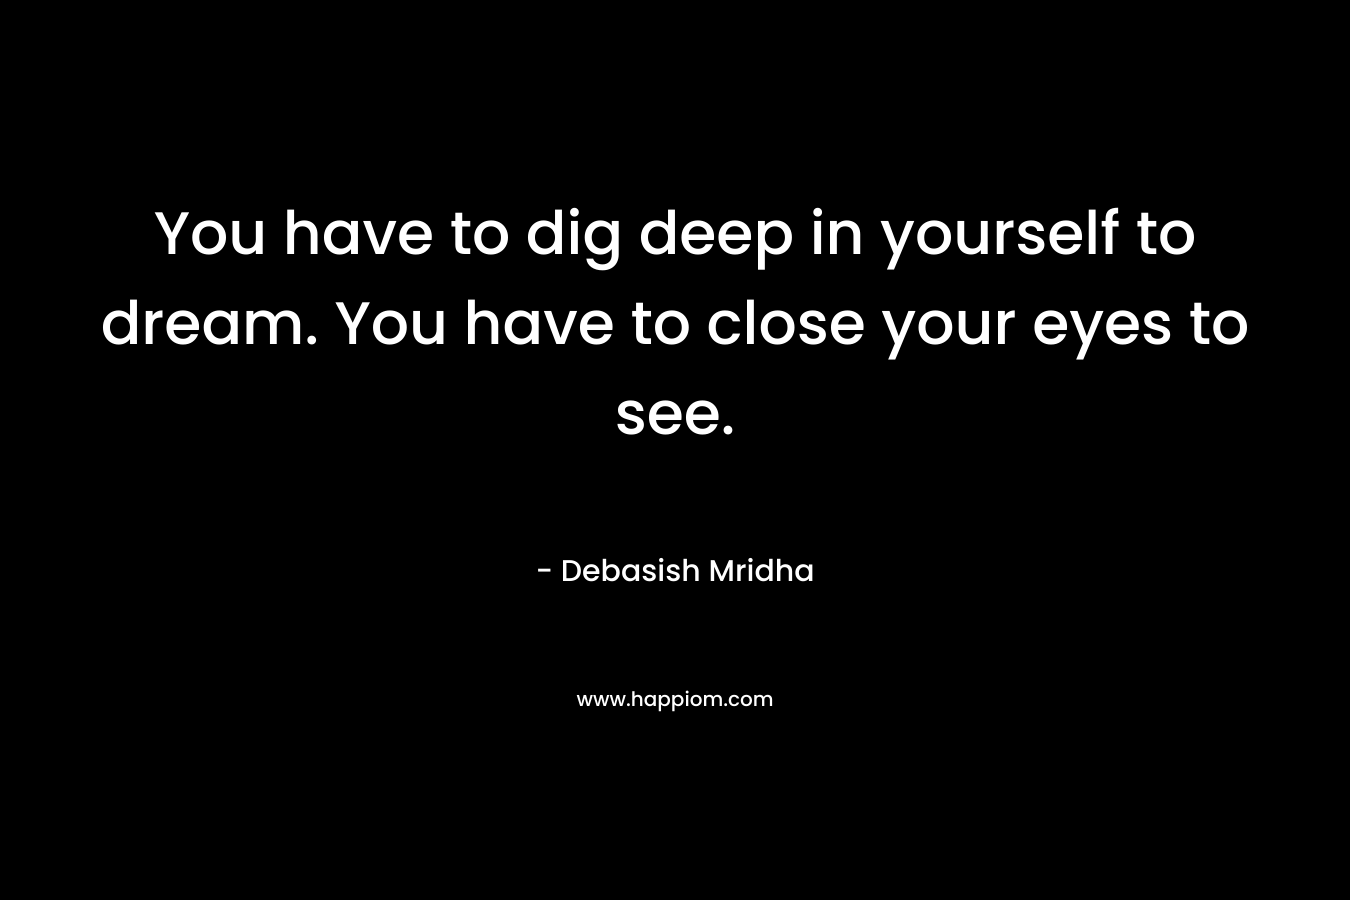 You have to dig deep in yourself to dream. You have to close your eyes to see.